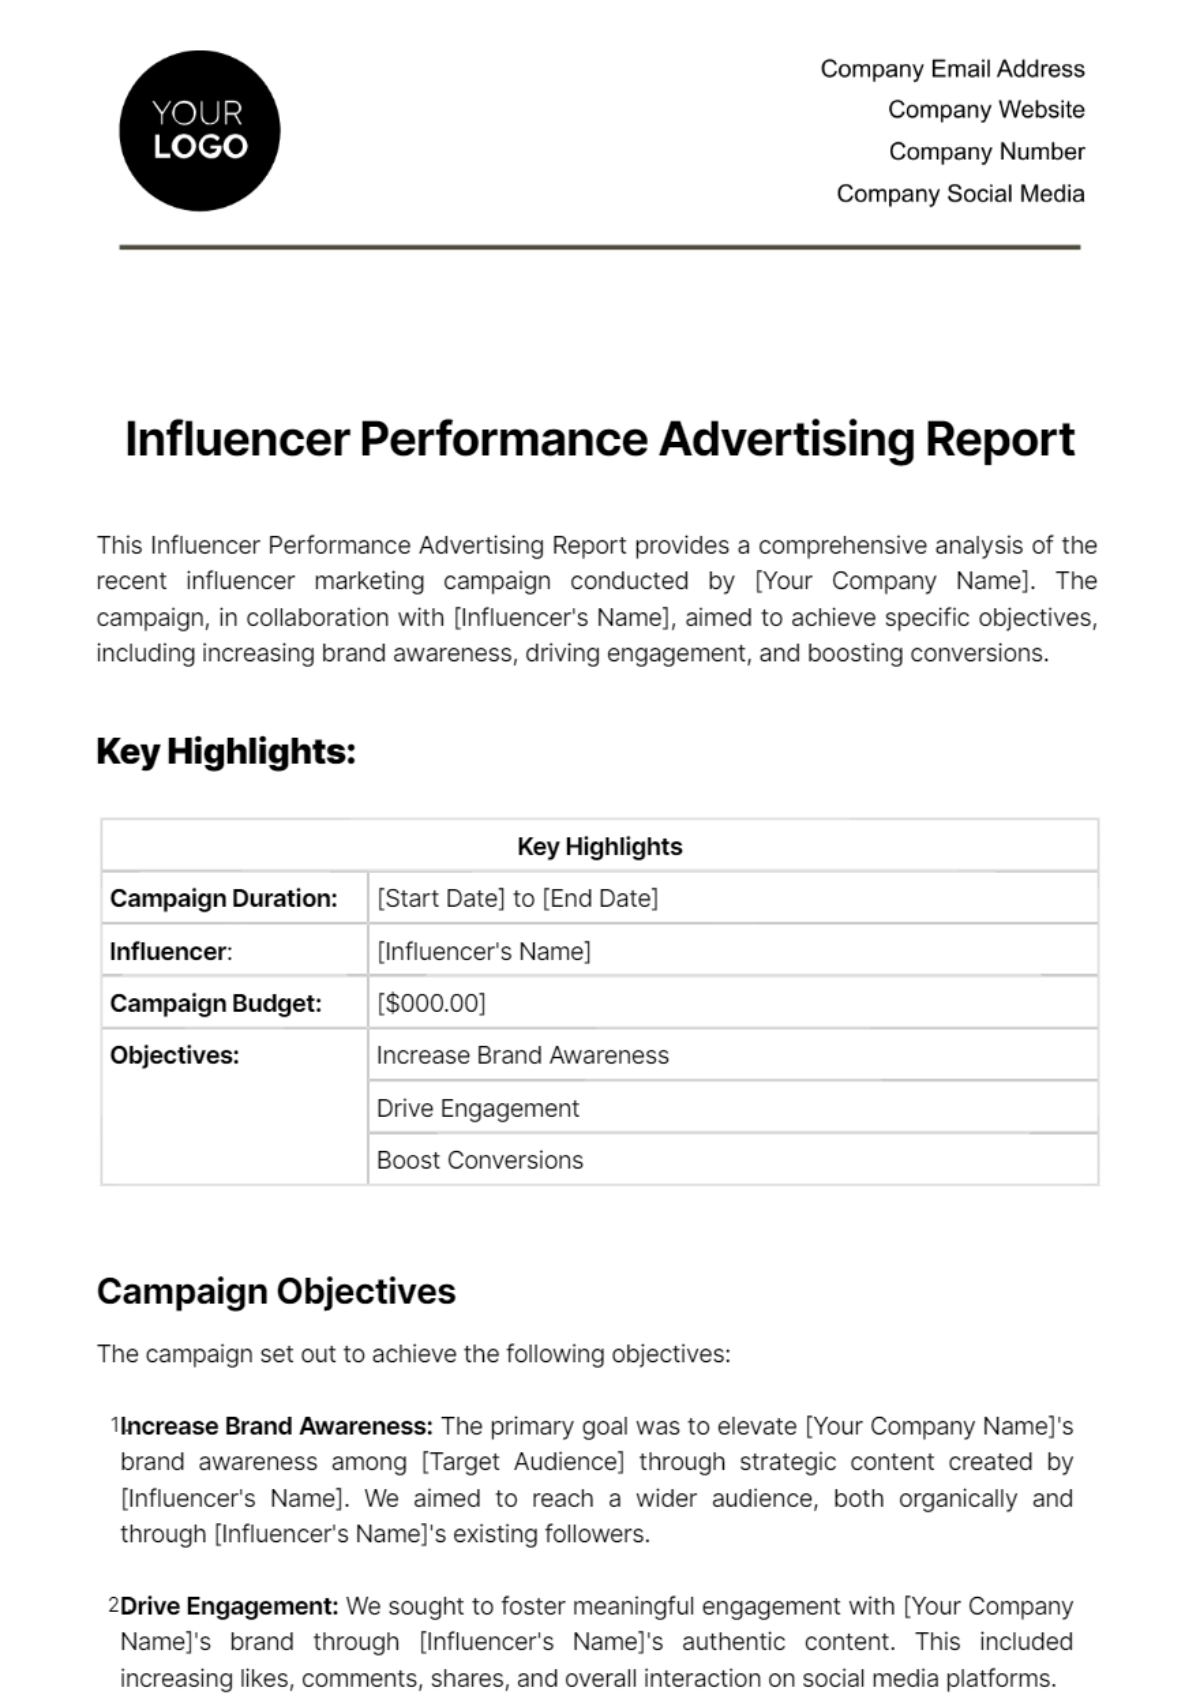 Free Influencer Performance Advertising Report Template